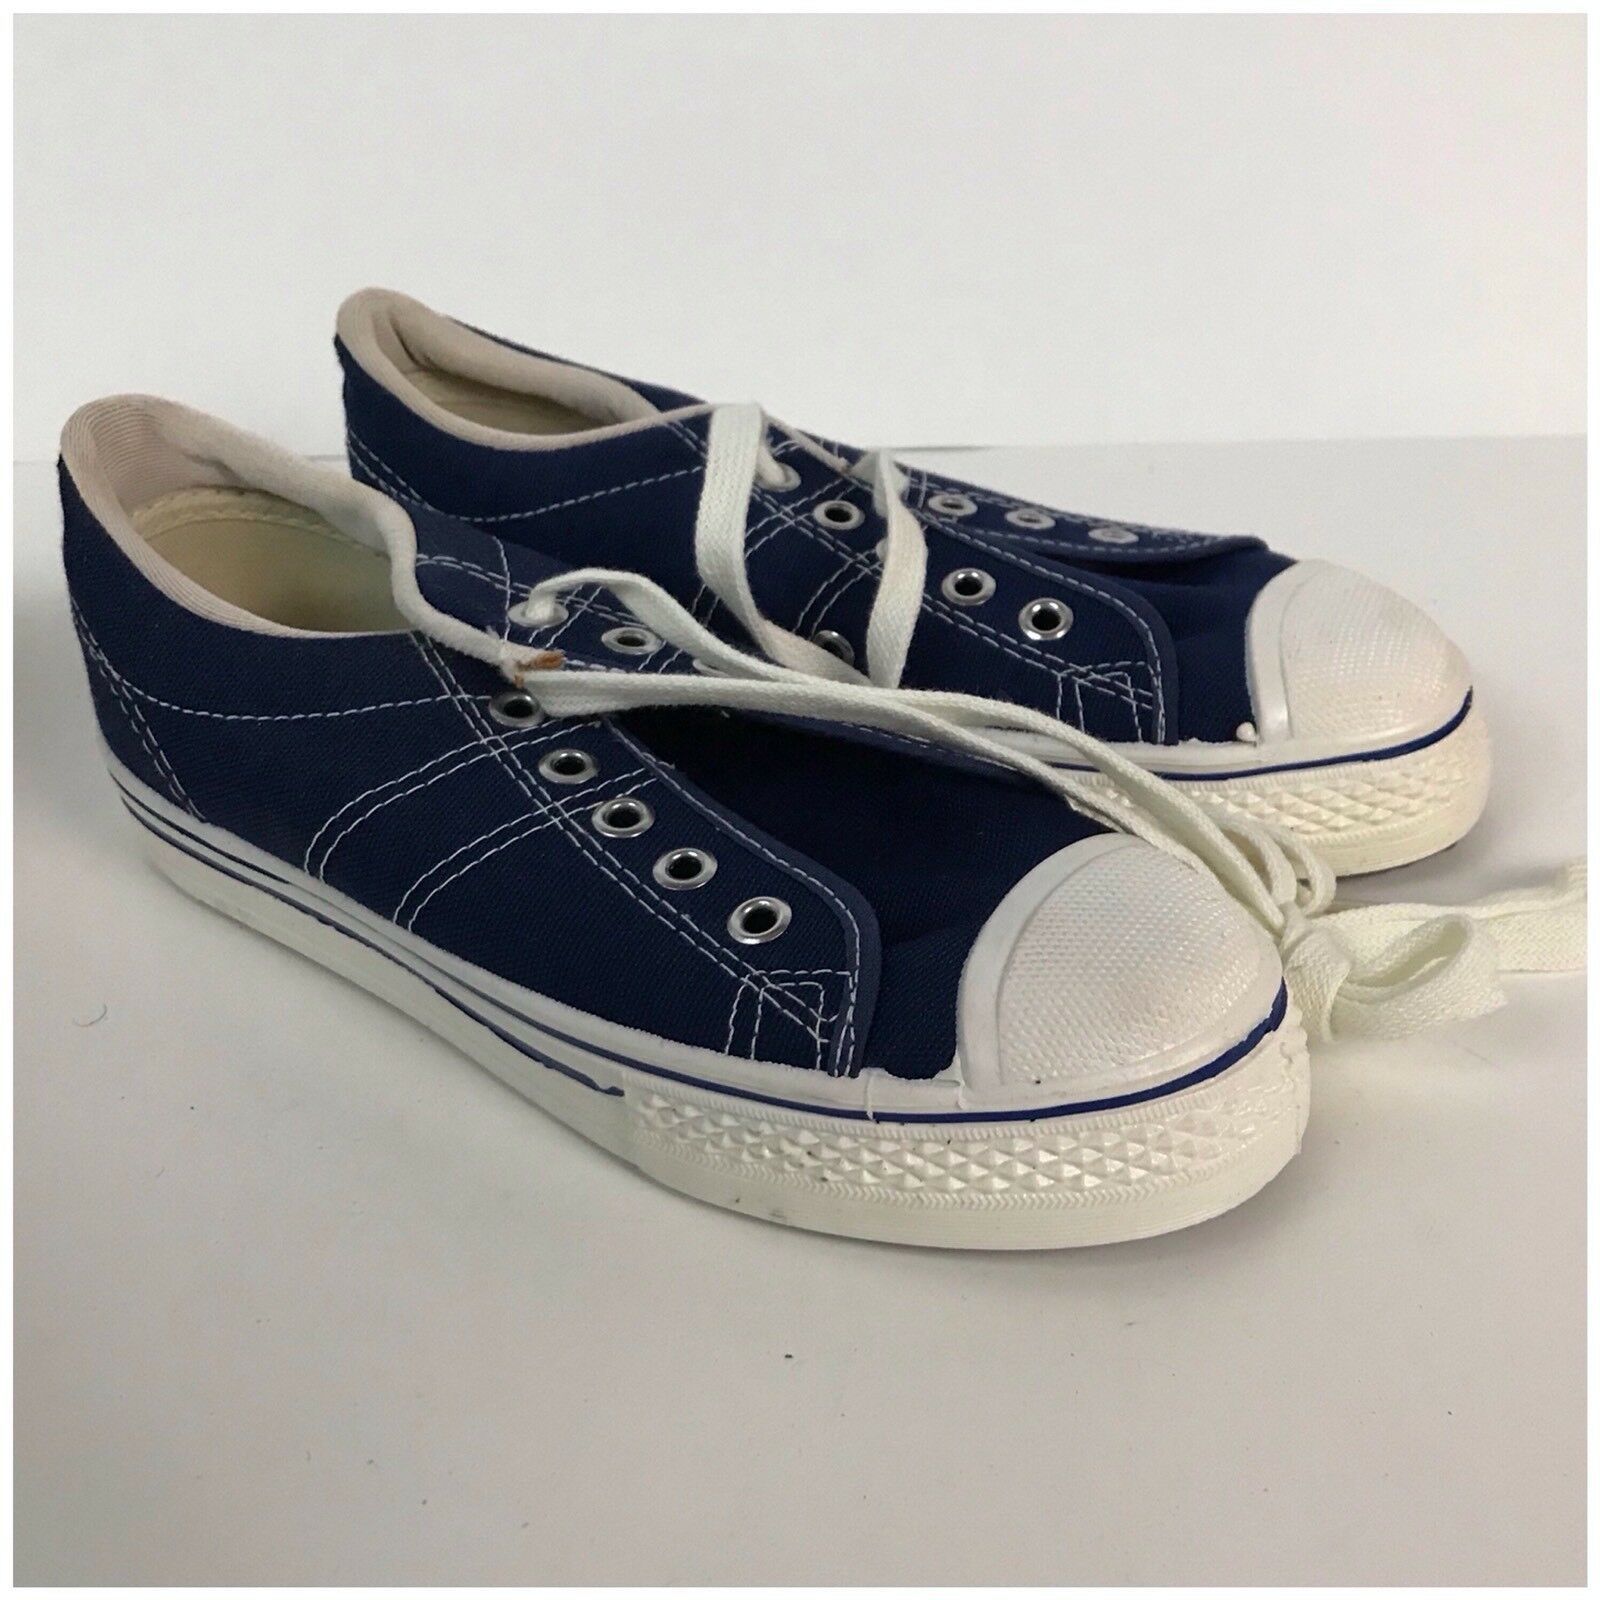 Vintage NOS 1970s Kids Converse Blue Label Straight Shooters Basketball ...